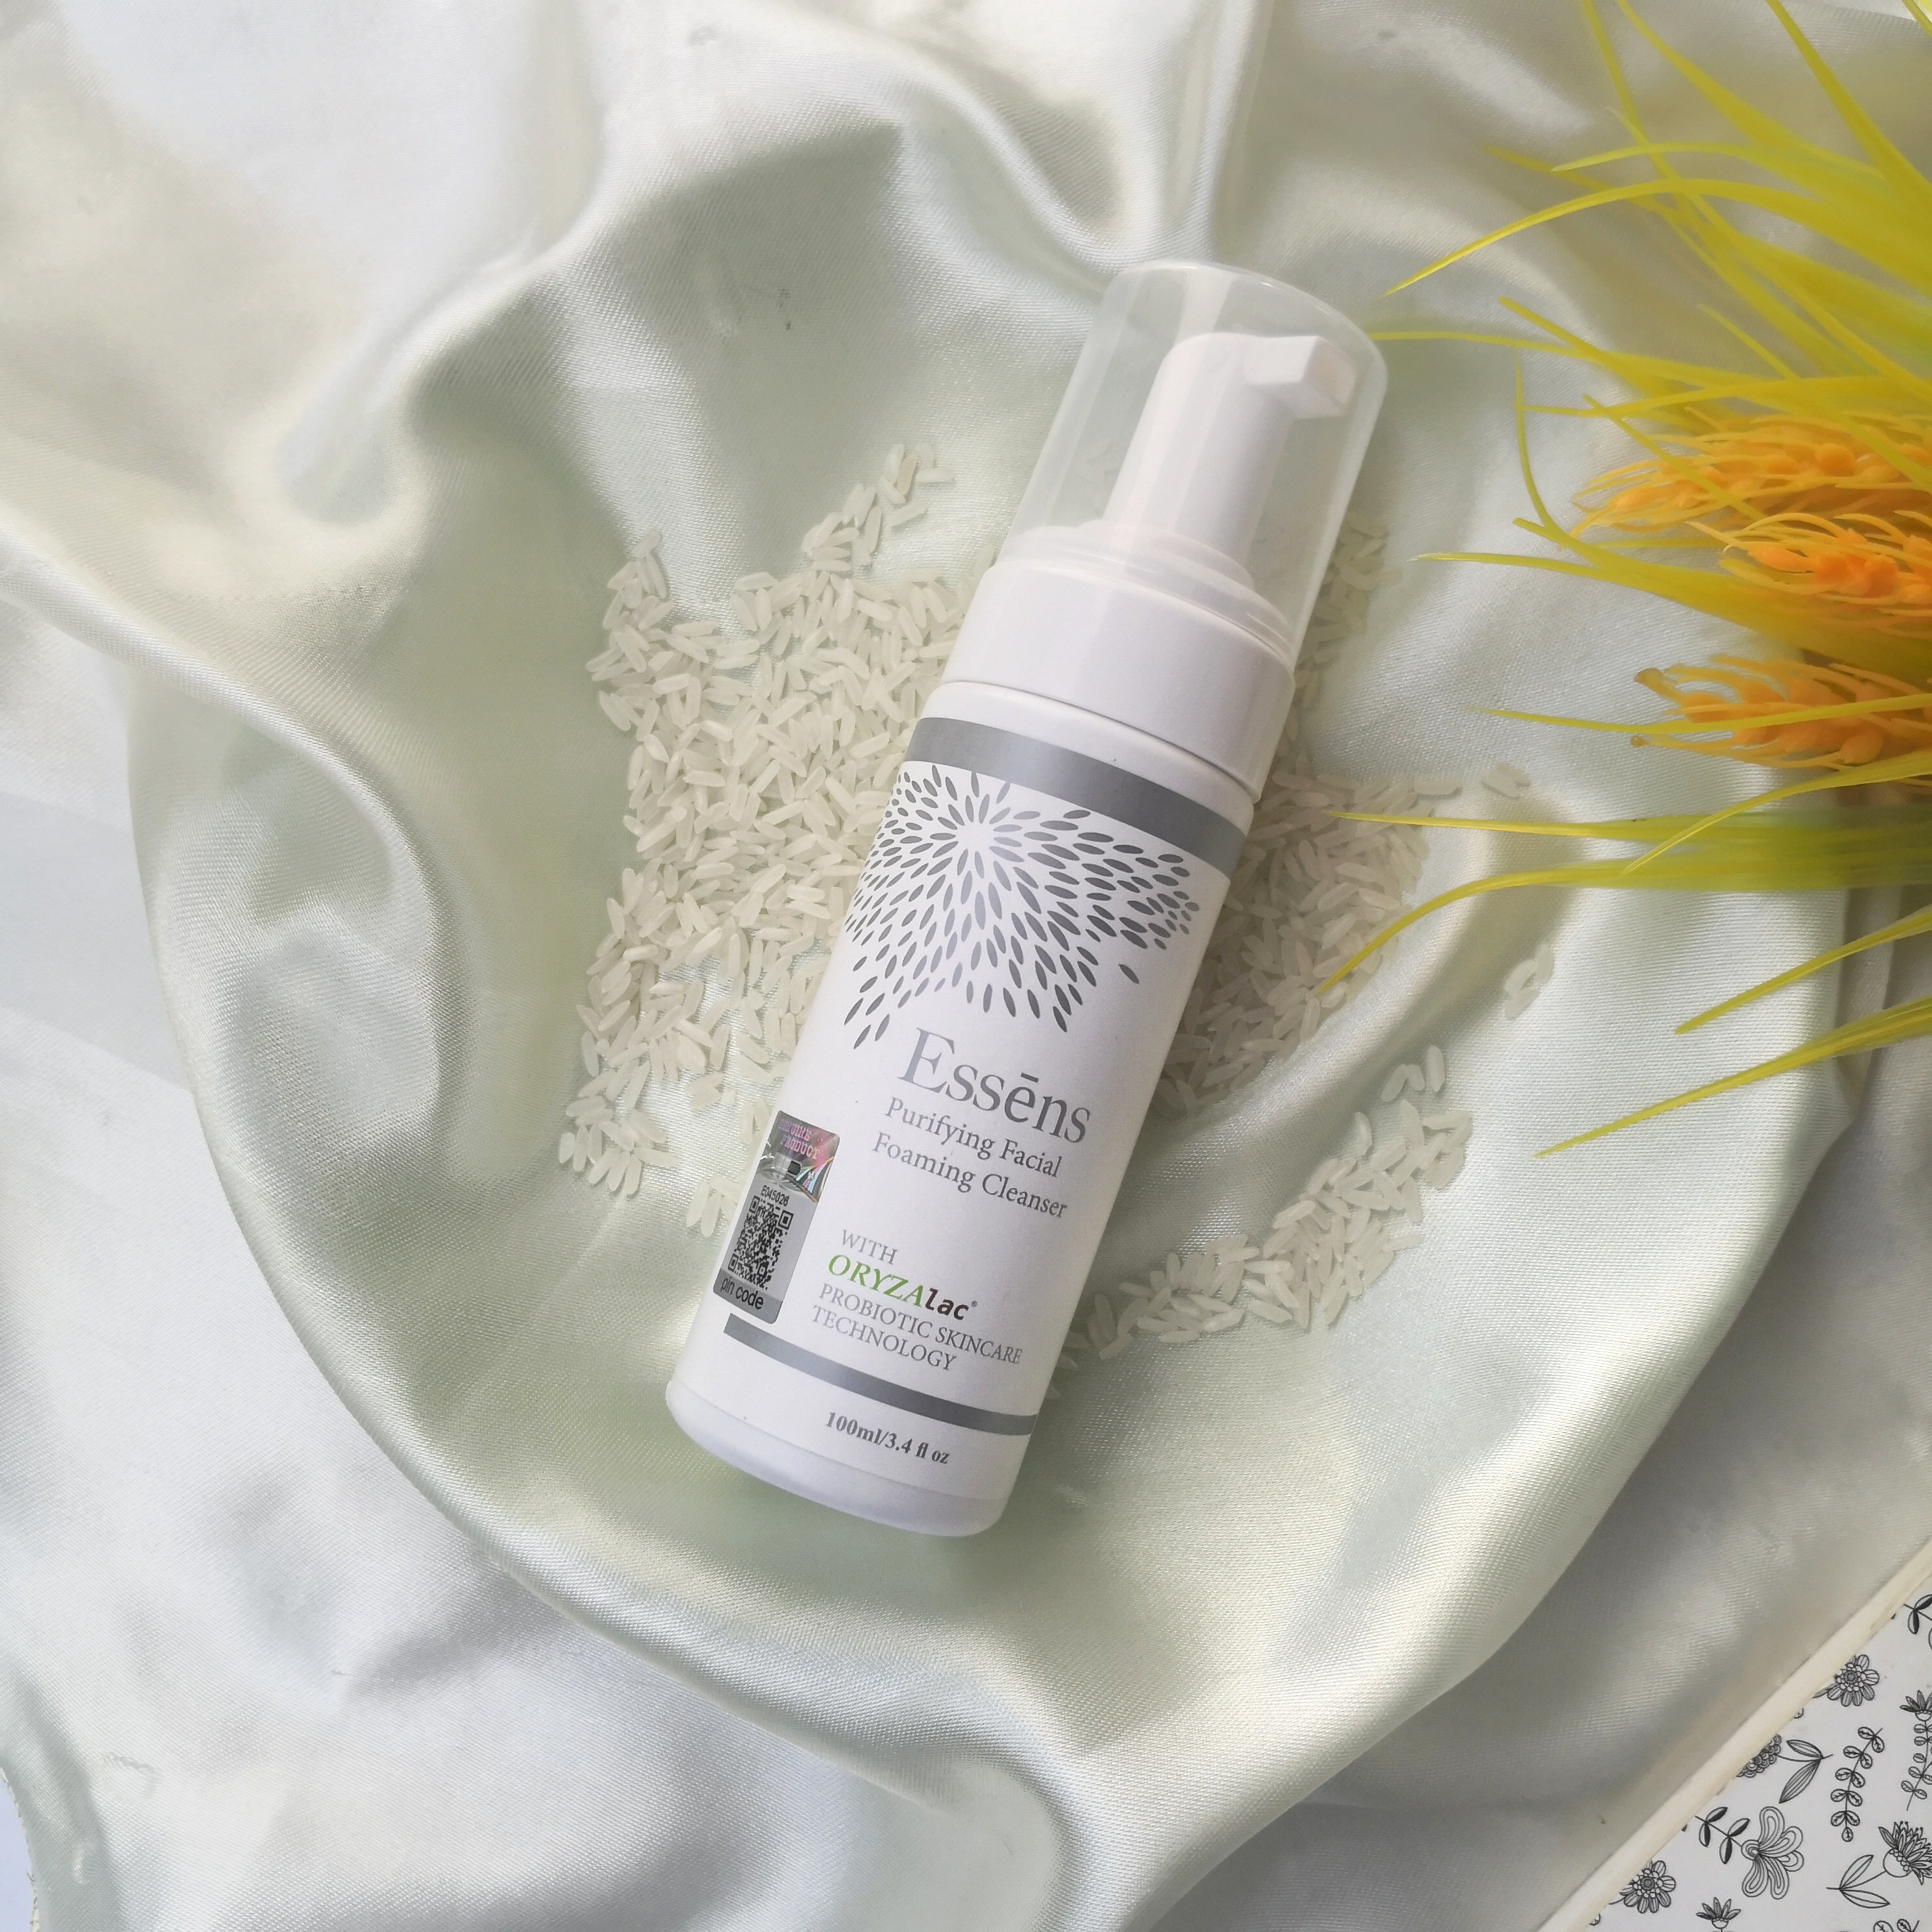 Mini Review of ESSENS ORYZAlac Purifying Facial Foaming Cleanser by Myyskincare